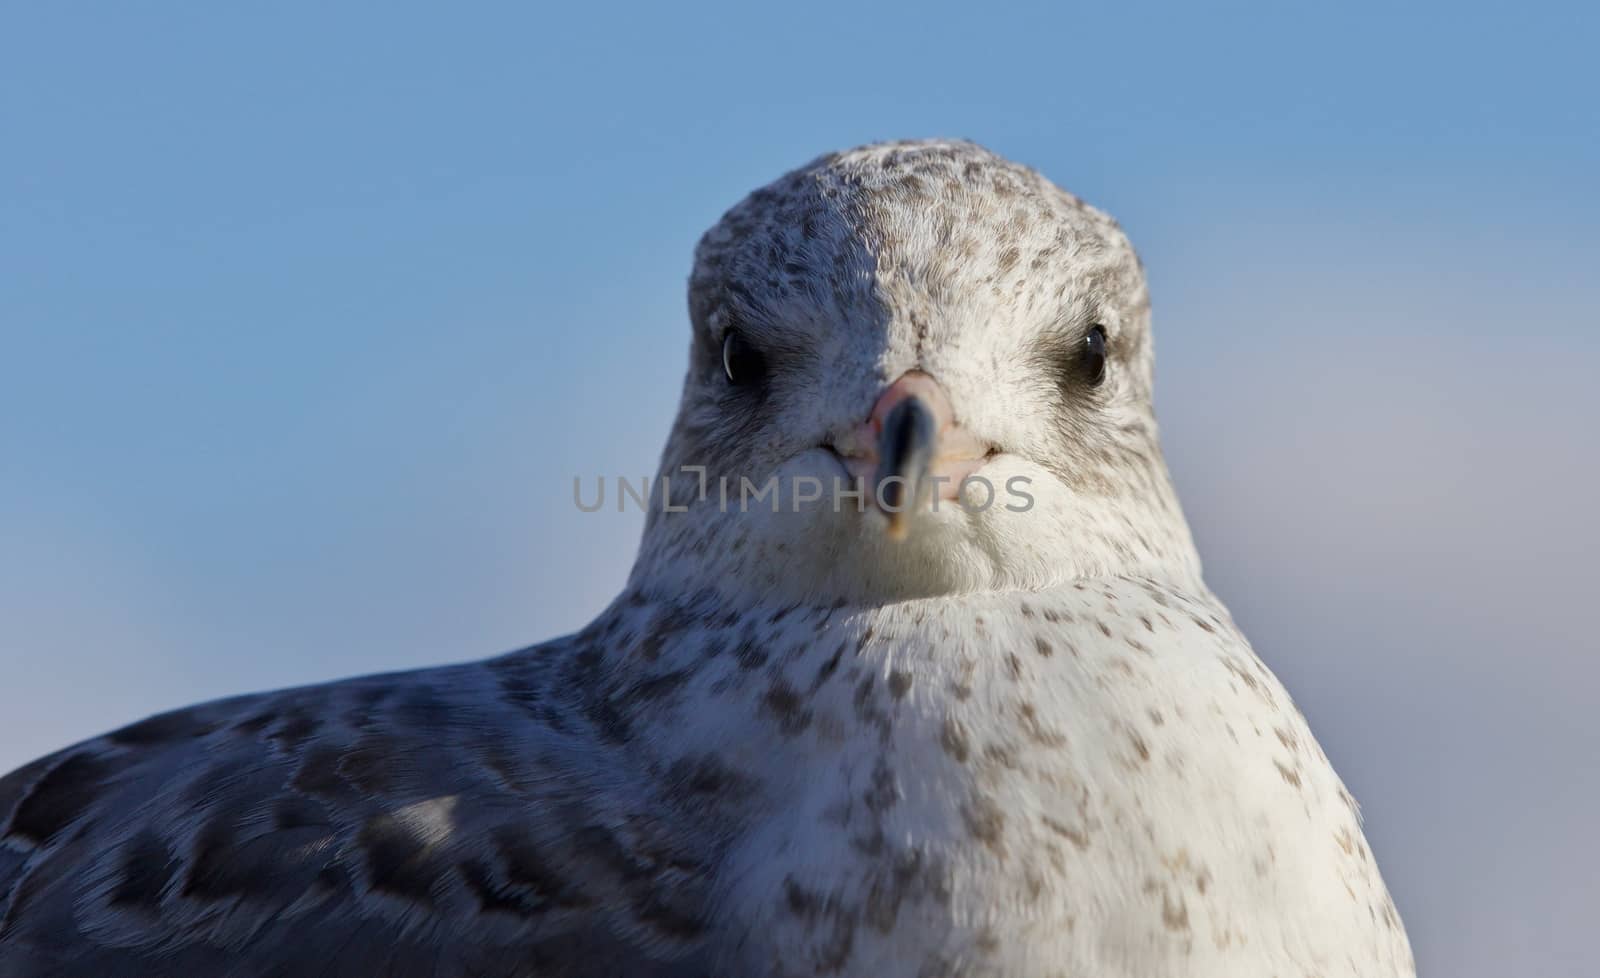 Amazing isolated photo of a cute gull